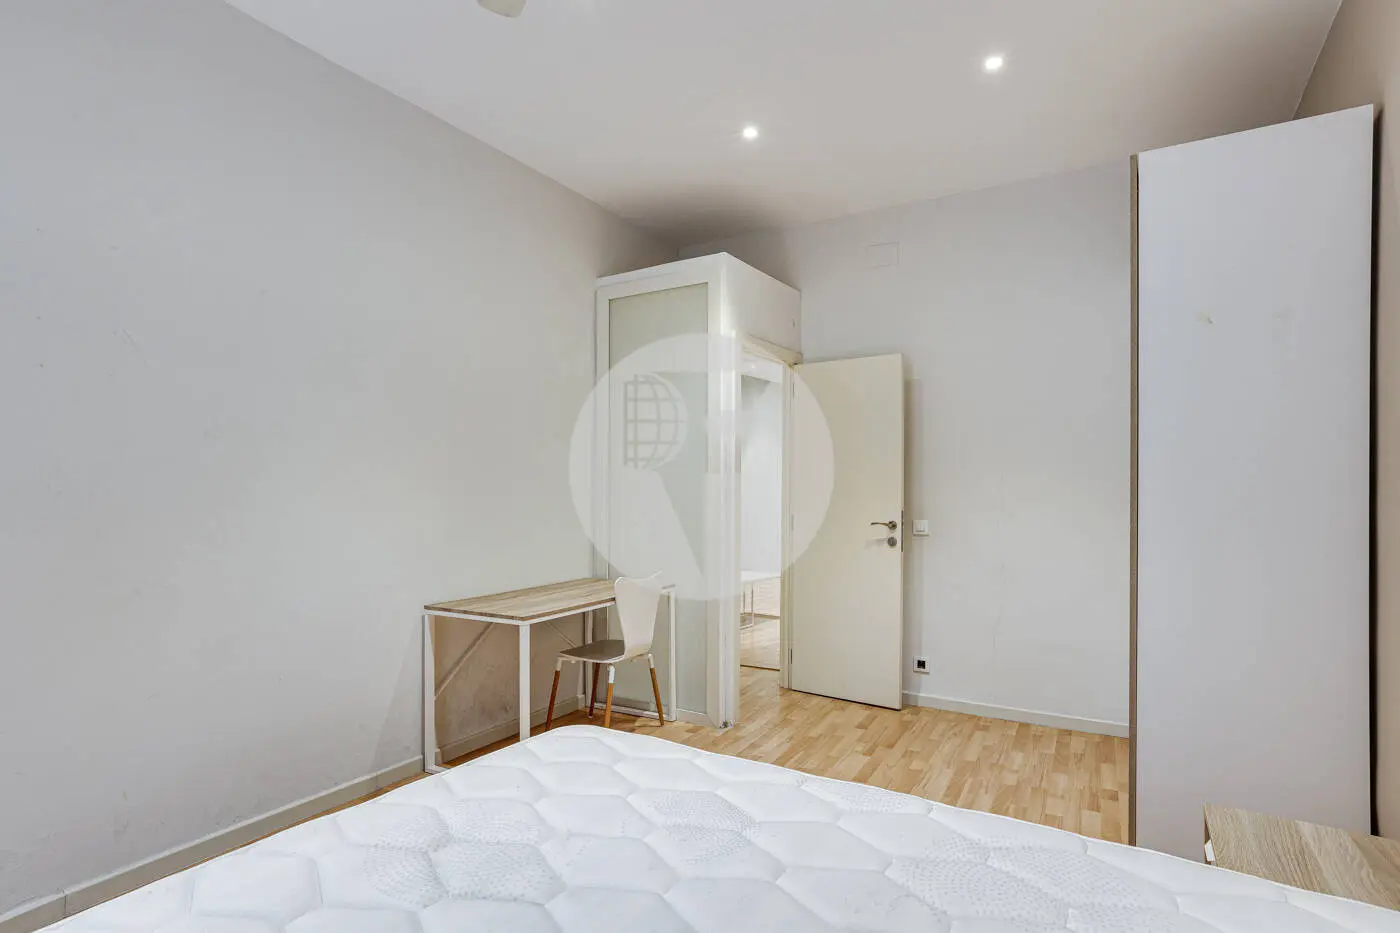 Magnificent apartment for sale next to Pl Universitat of 114m2 according to the land registry, located on Tallers Street in the Ciutat Vella neighborhood of Barcelona 26